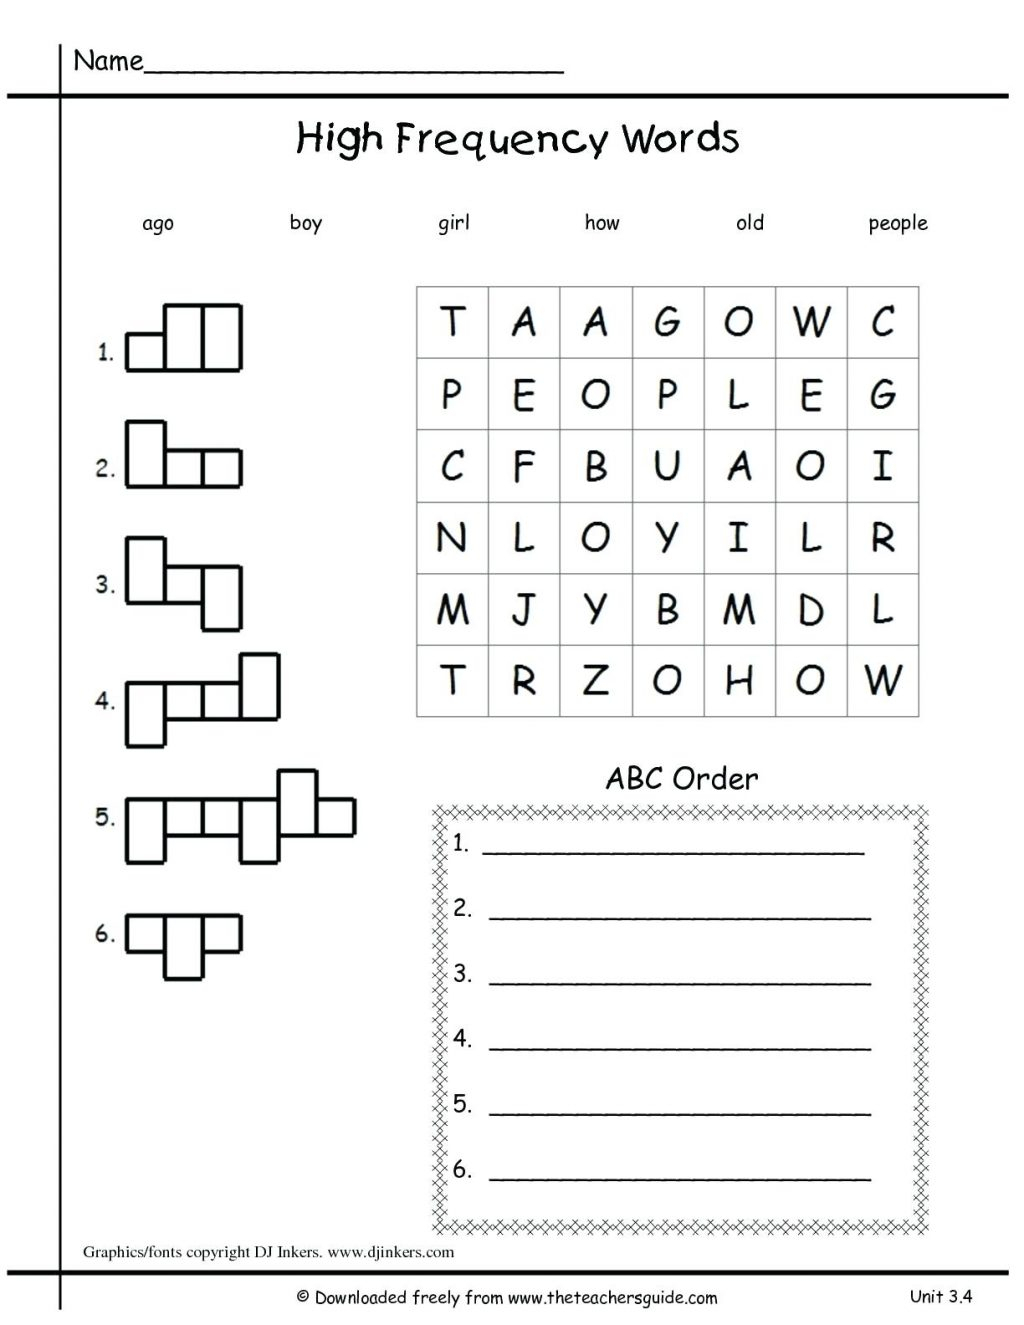 First Ade Language Arts Worksheets For Print Math Kids 1St within Free Alphabet Worksheets For 1St Grade